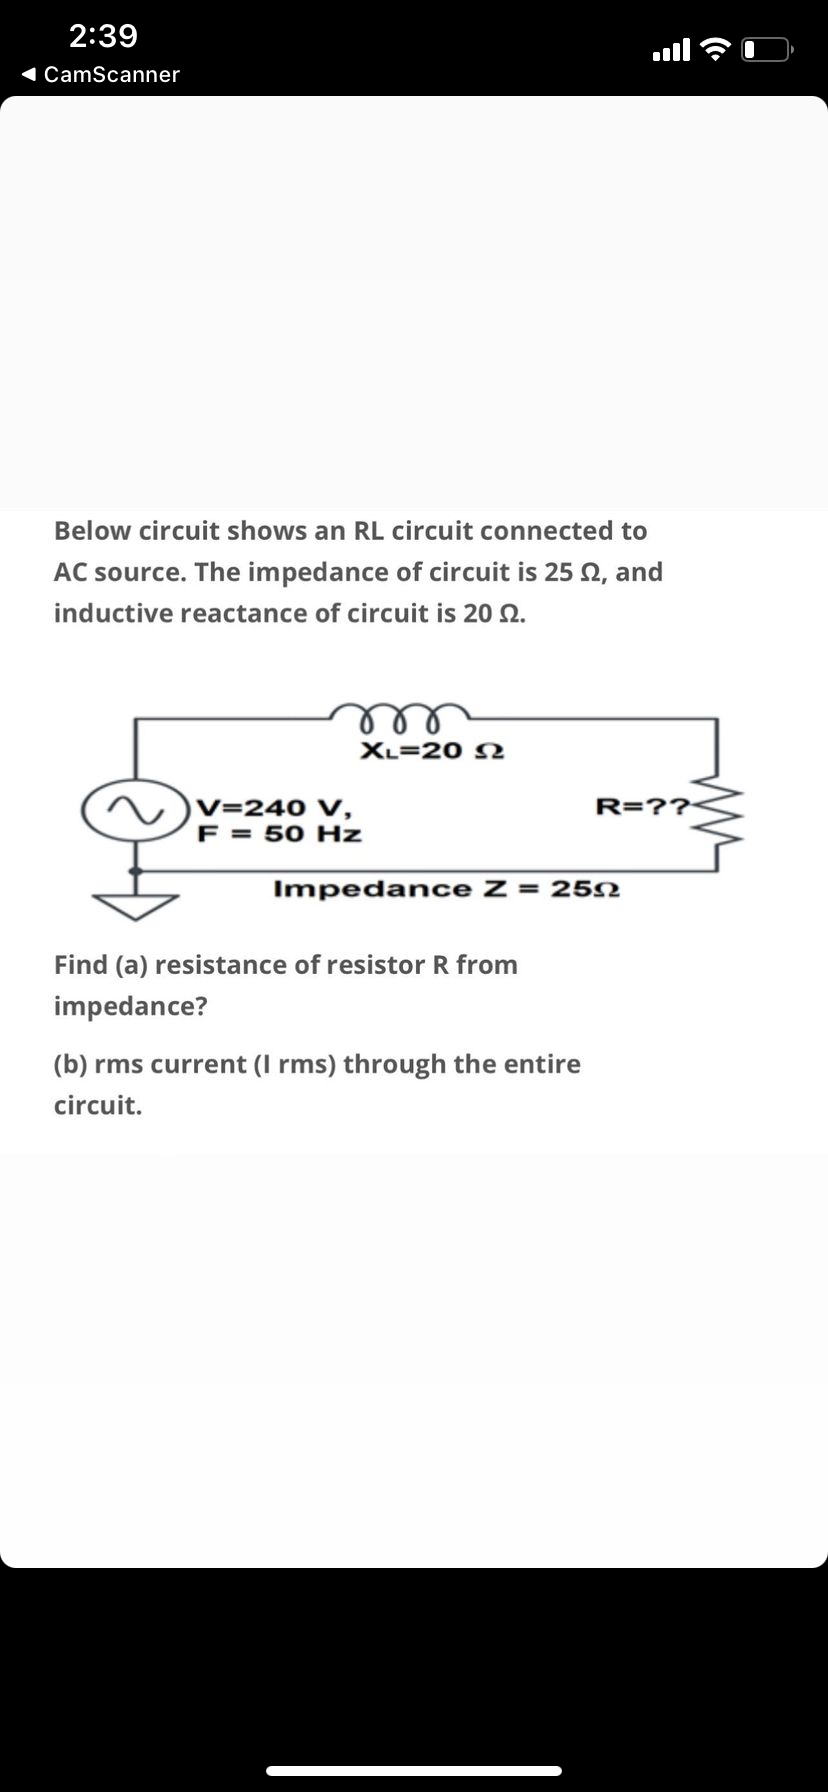 2:39
l
1 CamScanner
Below circuit shows an RL circuit connected to
AC source. The impedance of circuit is 25 Q, and
inductive reactance of circuit is 20 2.
ell
XL=20 N
V=240 V,
F = 50 Hz
R=??
Impedance Z = 25N
Find (a) resistance of resistor R from
impedance?
(b) rms current (I rms) through the entire
circuit.
